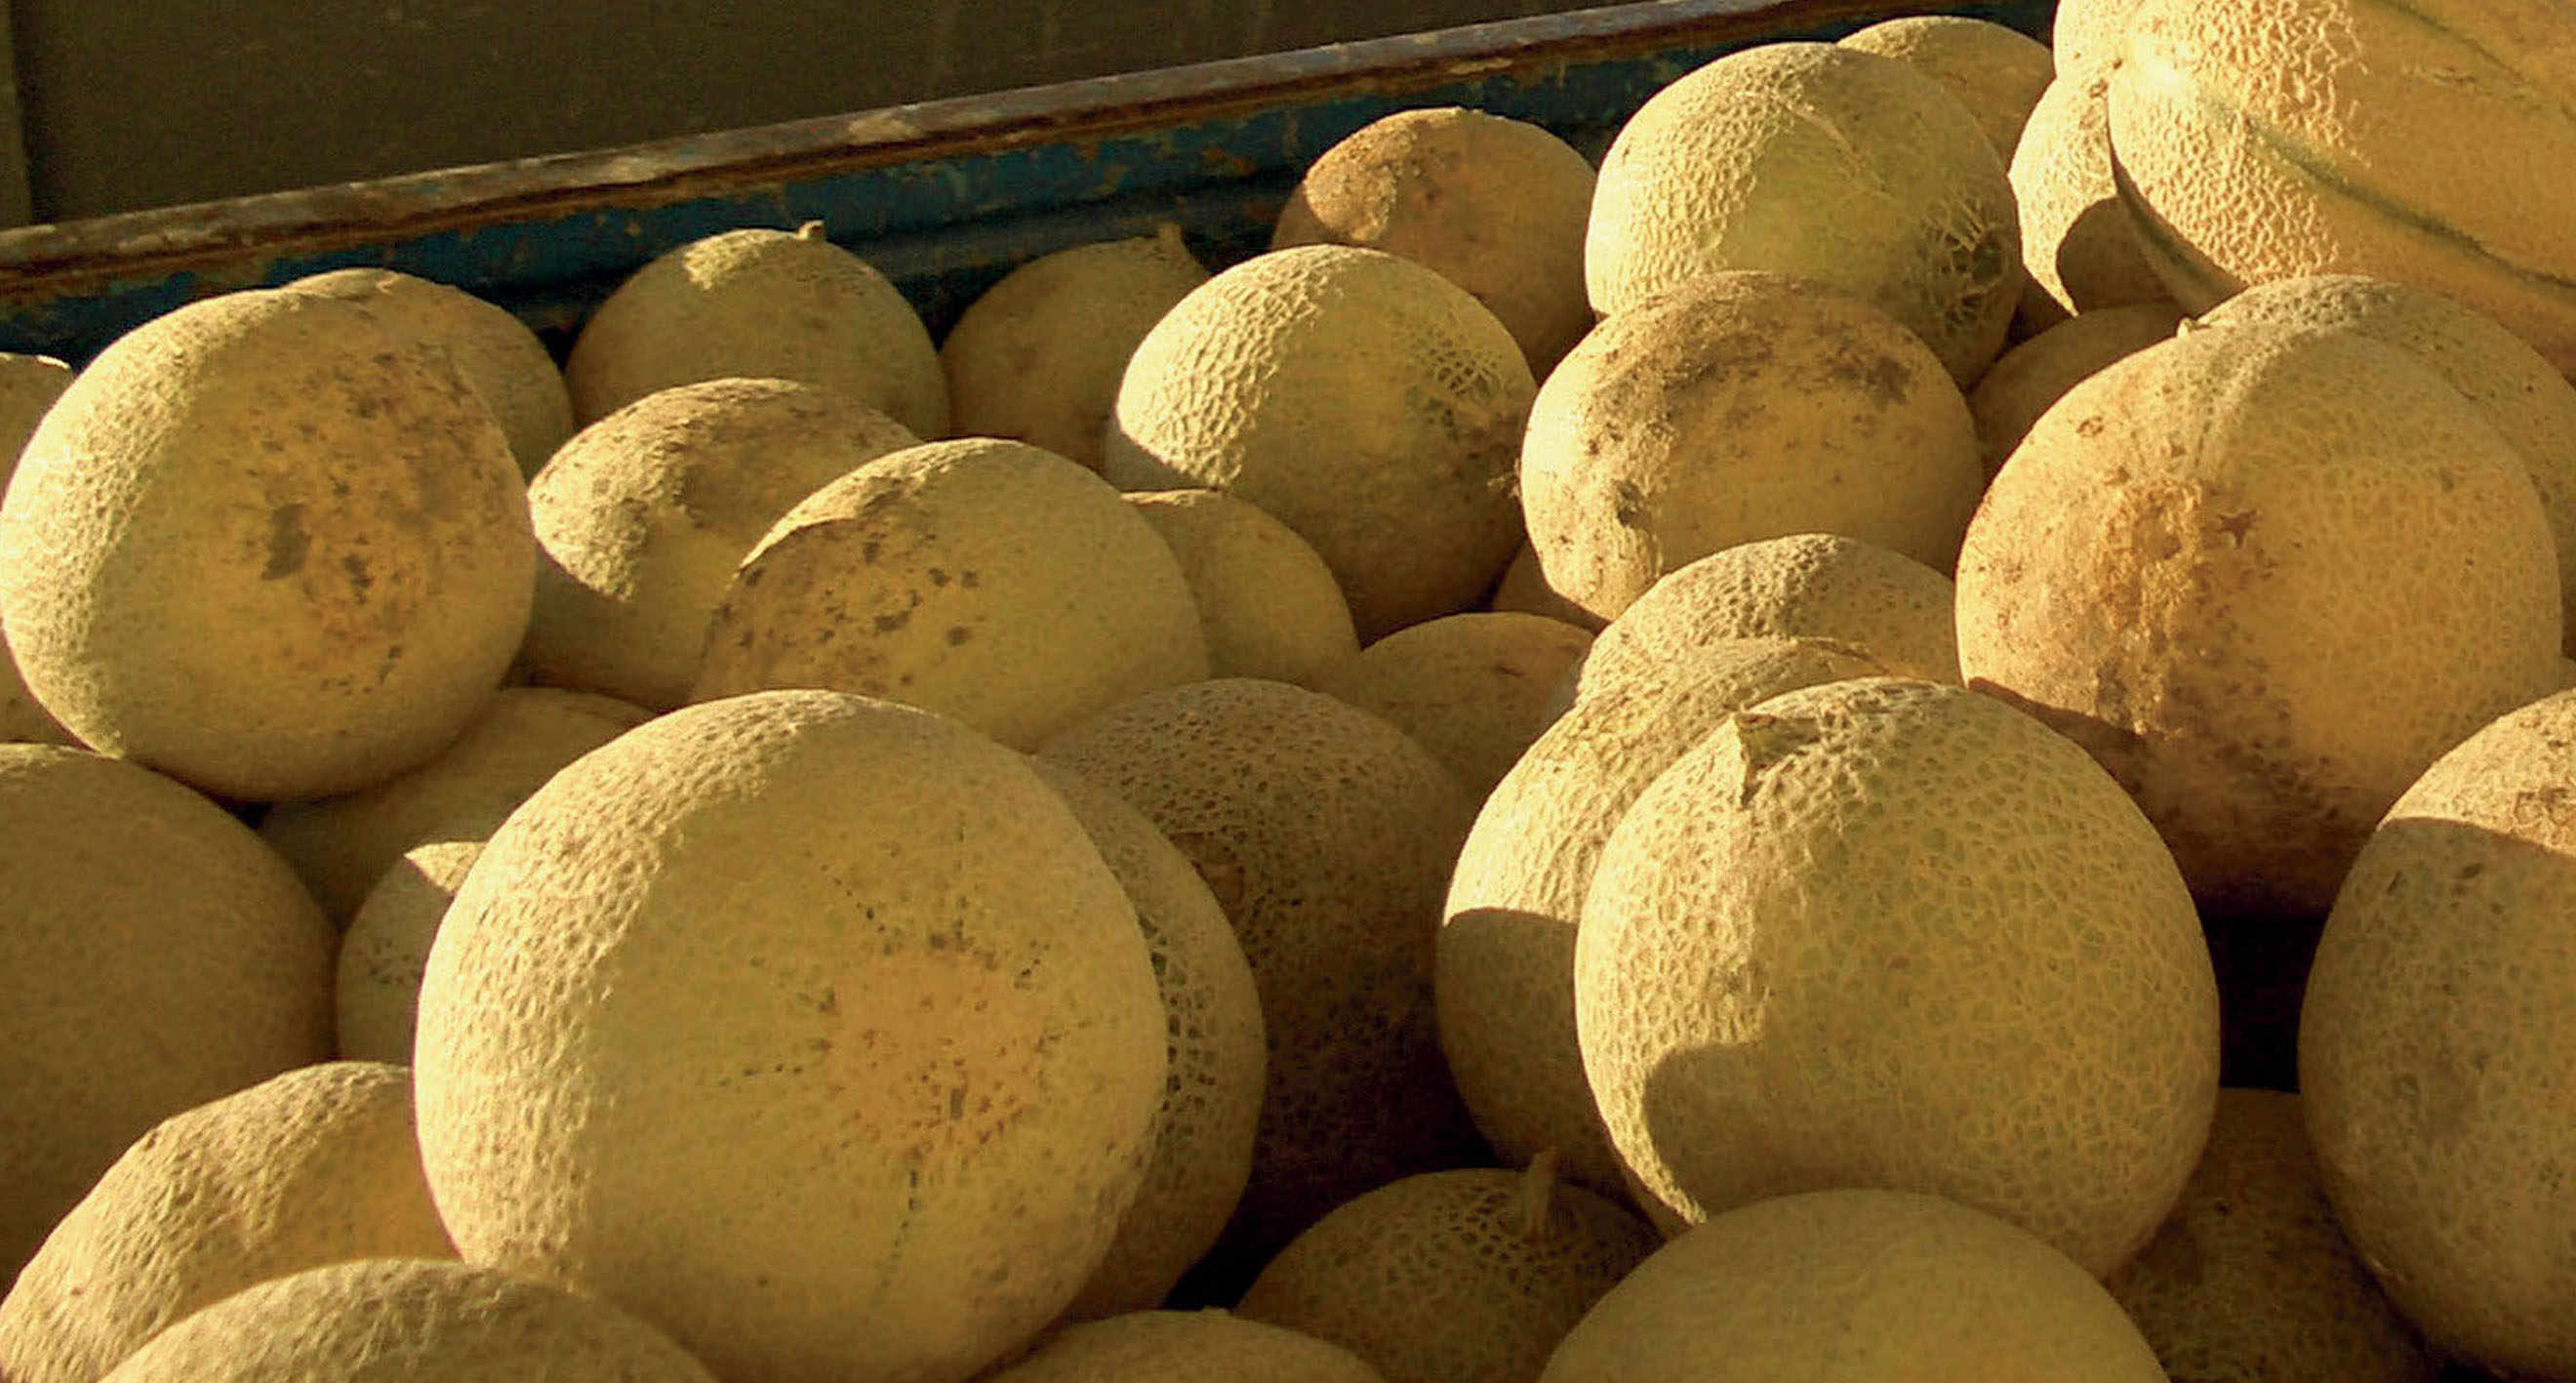 Melon is an important product in the province of Mantua and in 2003 the Consortium of the Mantua Melon was created.